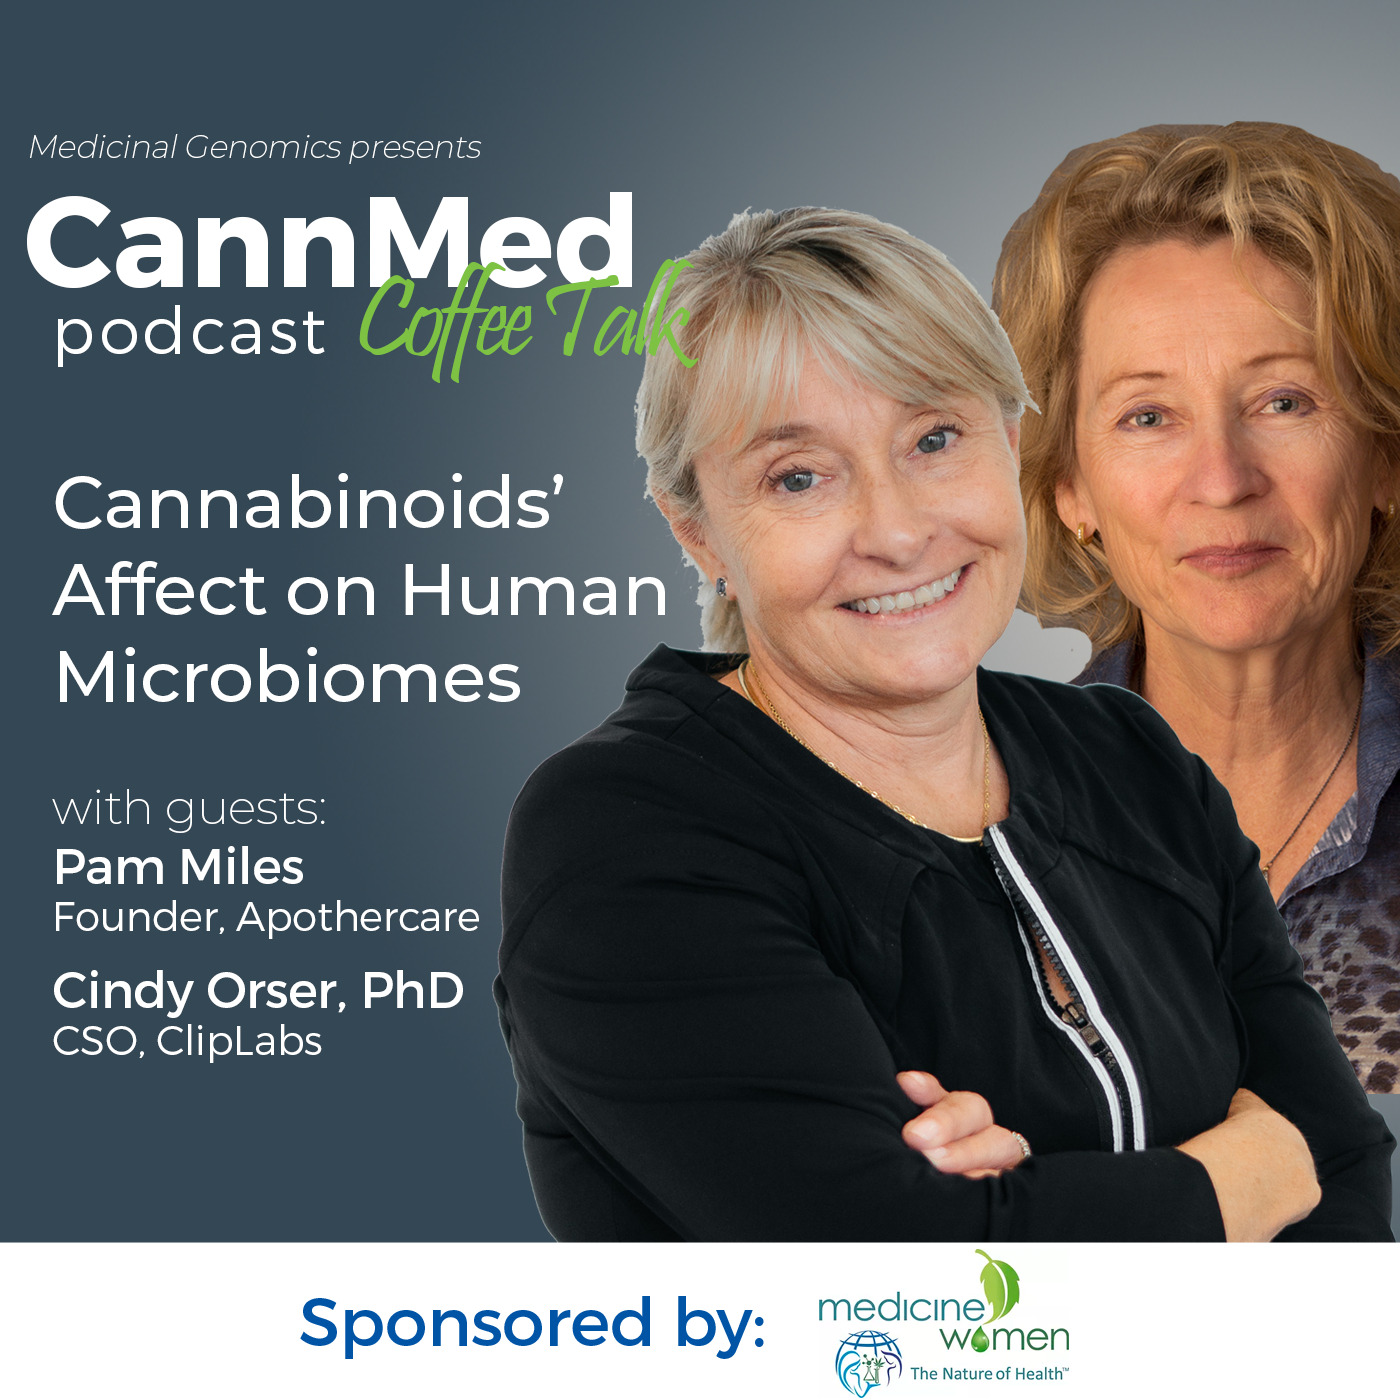 Featured image for “Cannabinoids’ Affect on Human  Microbiomes with Pam Miles and Cindy Orser, PhD”